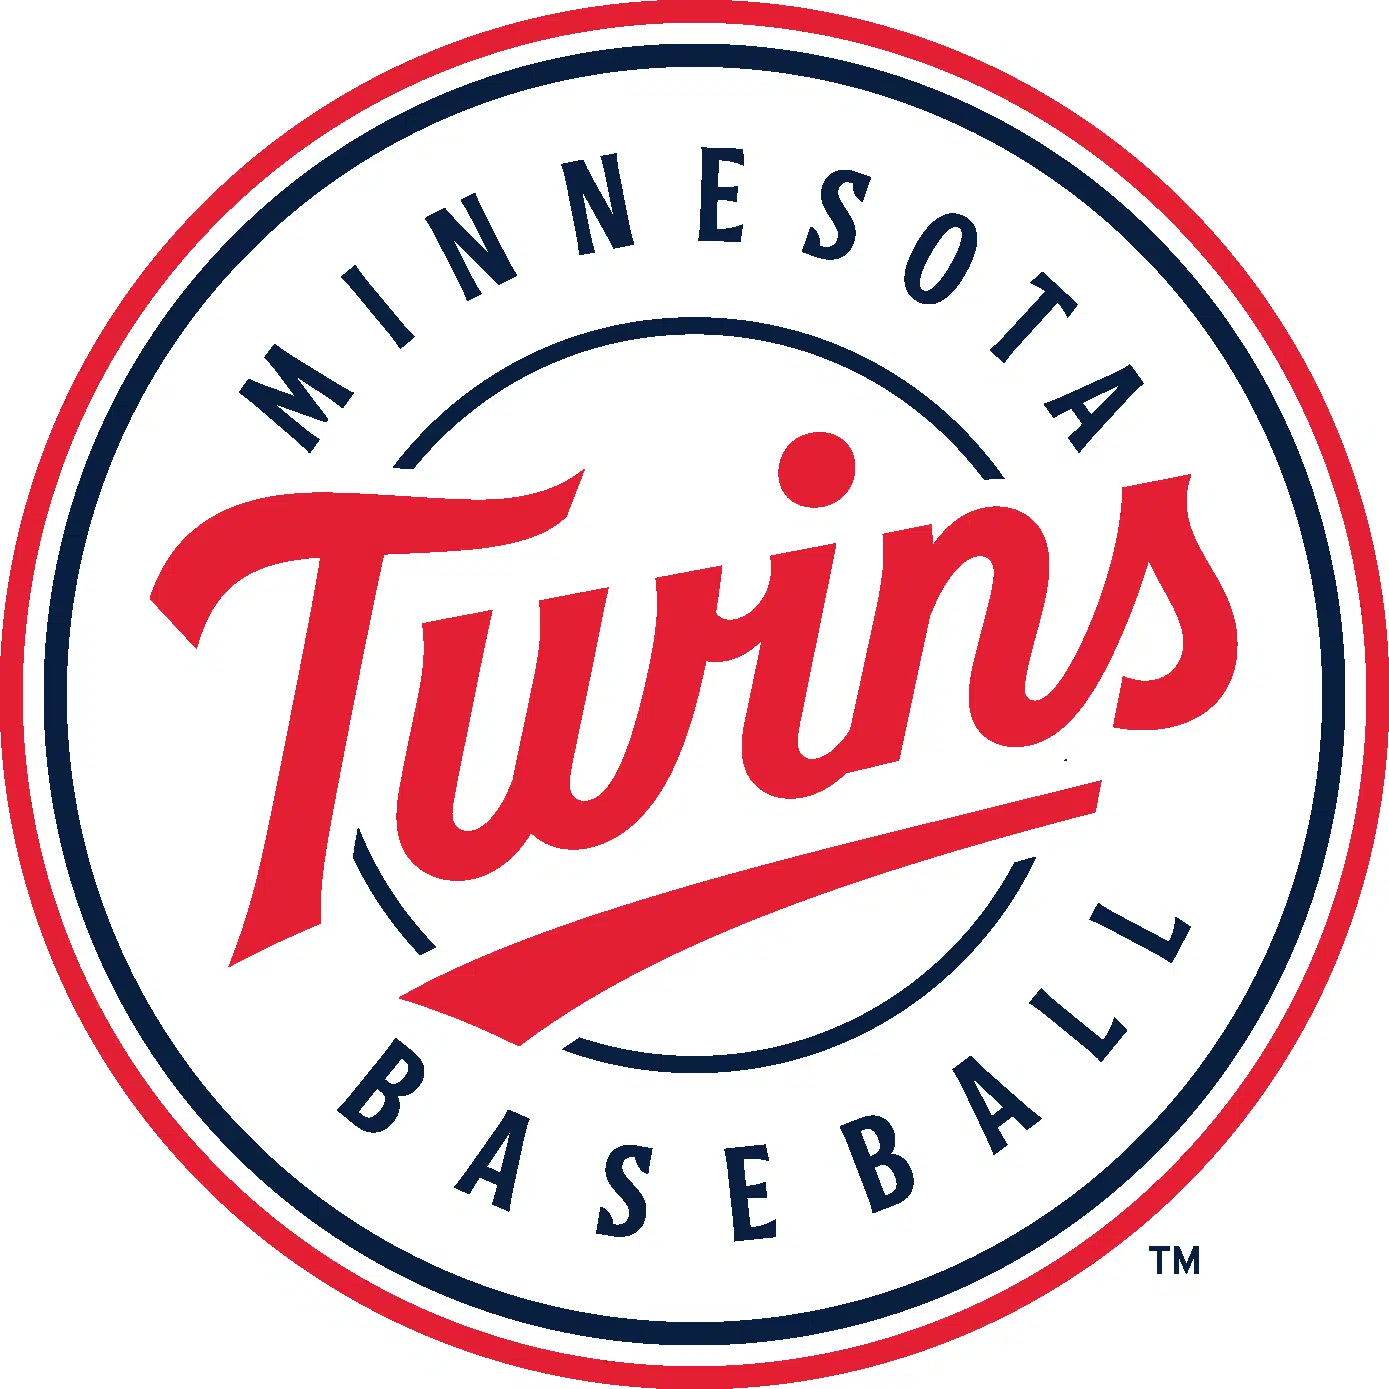 Byron Buxton homers again as Twins beat Indians 8-4